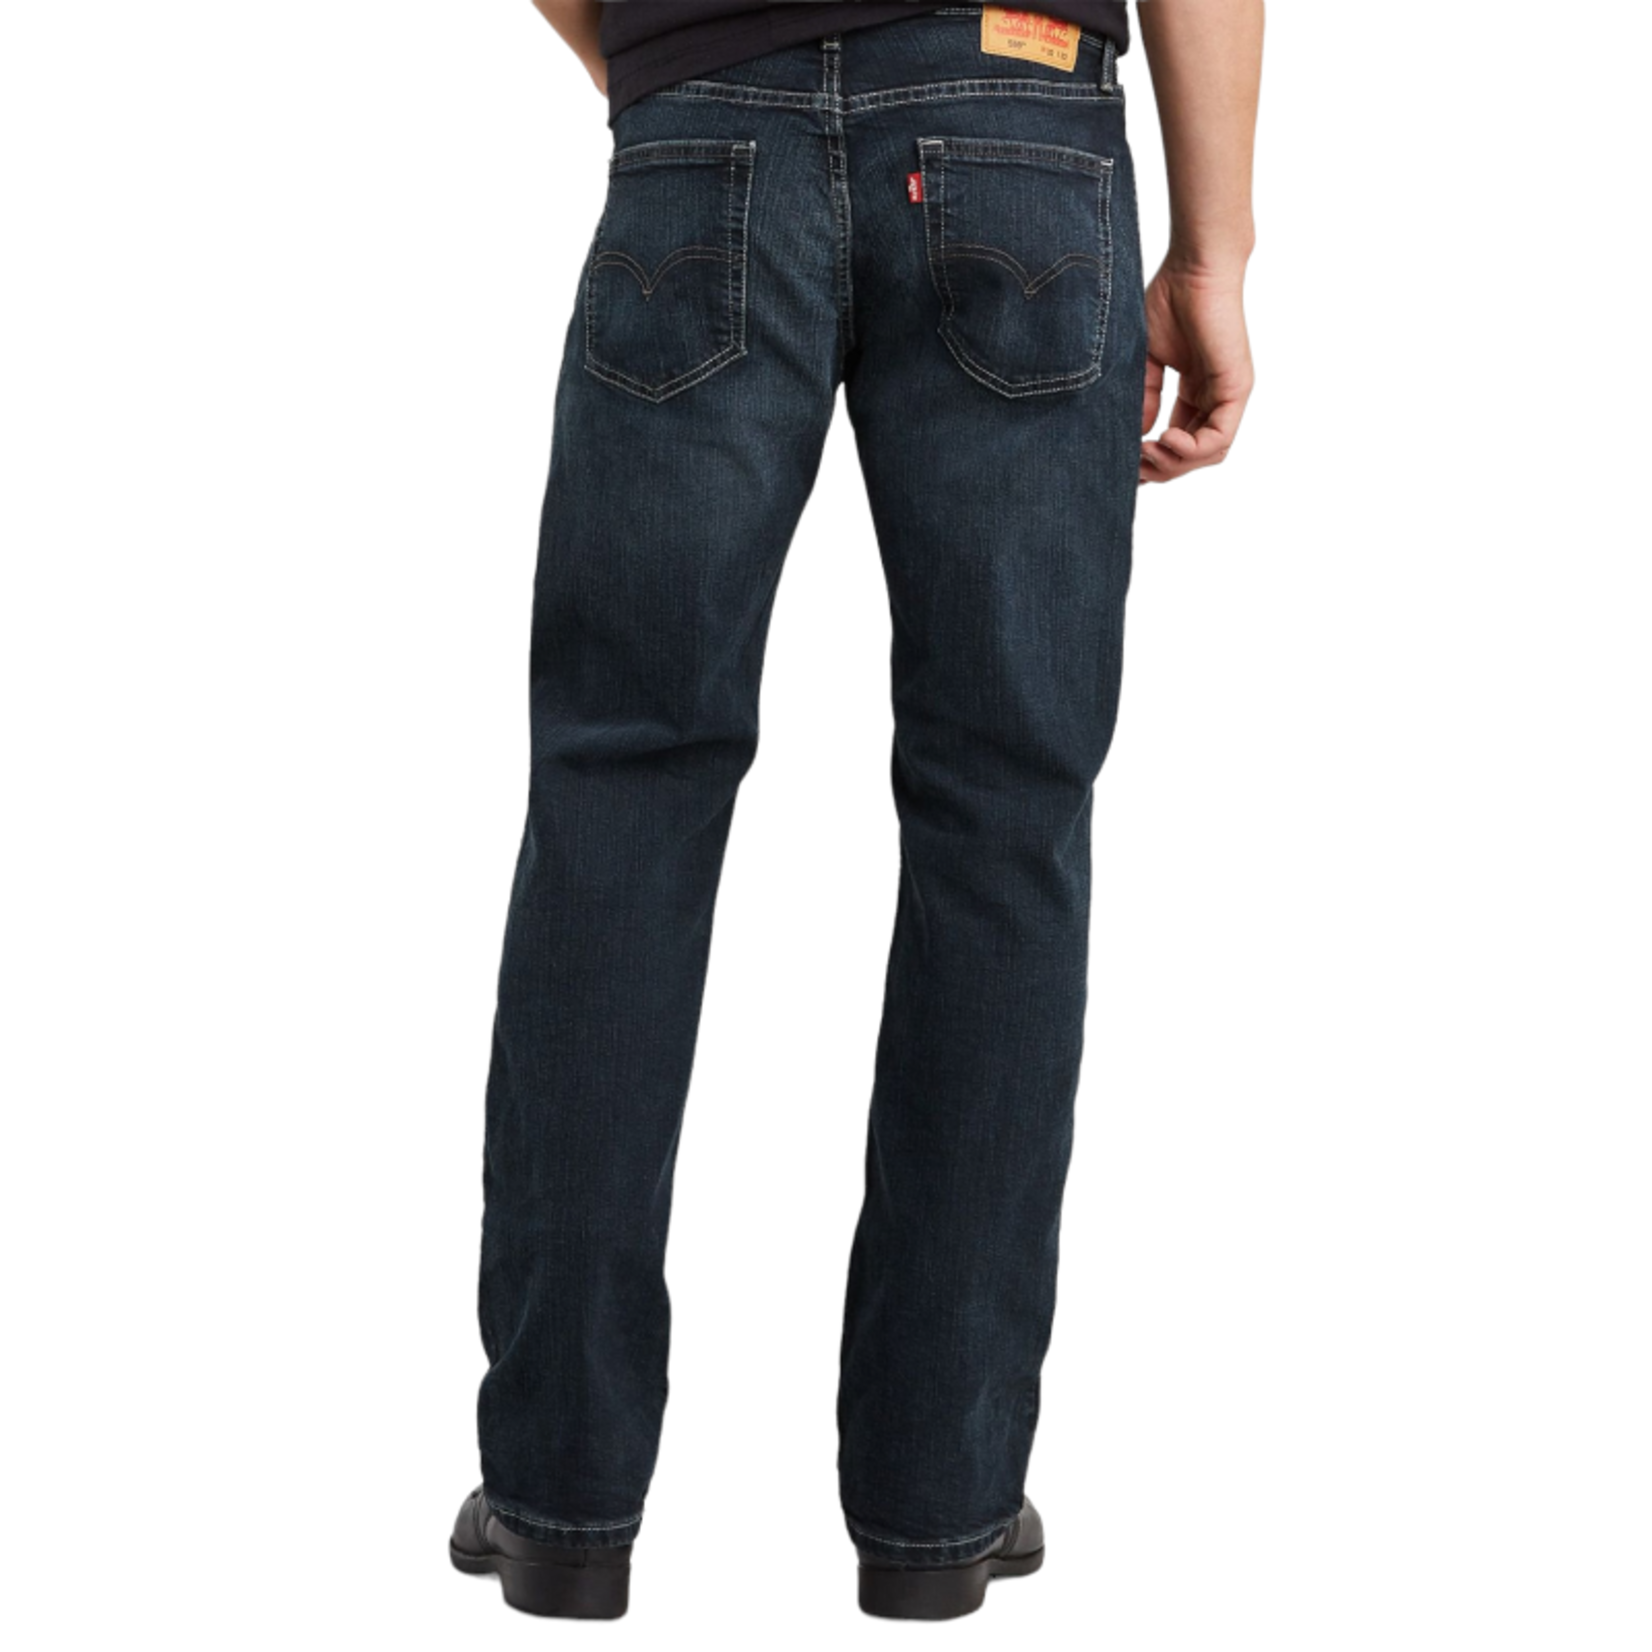 LEVI'S 559 RELAXED STRAIGHT FIT JEAN 00559-0457 - Michael's and Jody's